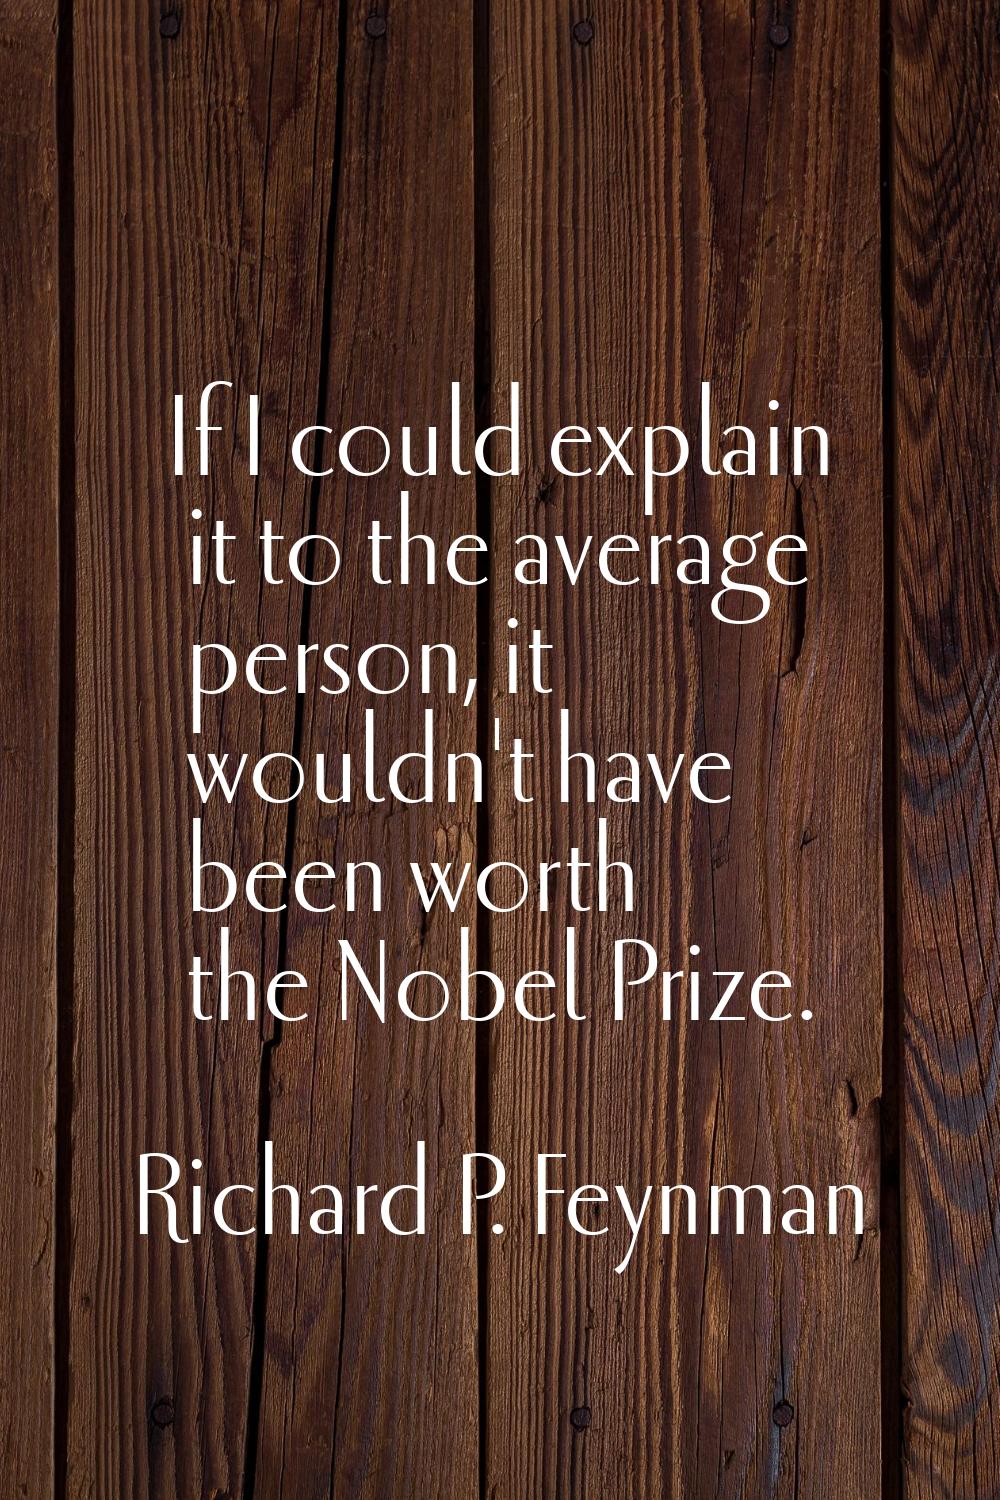 If I could explain it to the average person, it wouldn't have been worth the Nobel Prize.